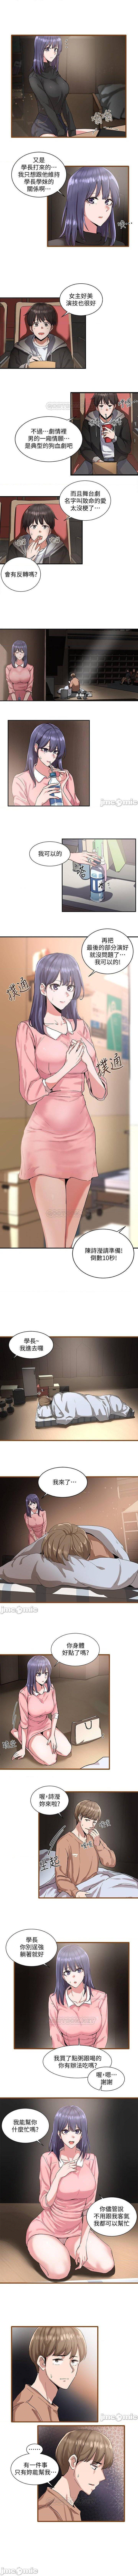 Gay Solo 社團學姊 Liveshow - Page 9